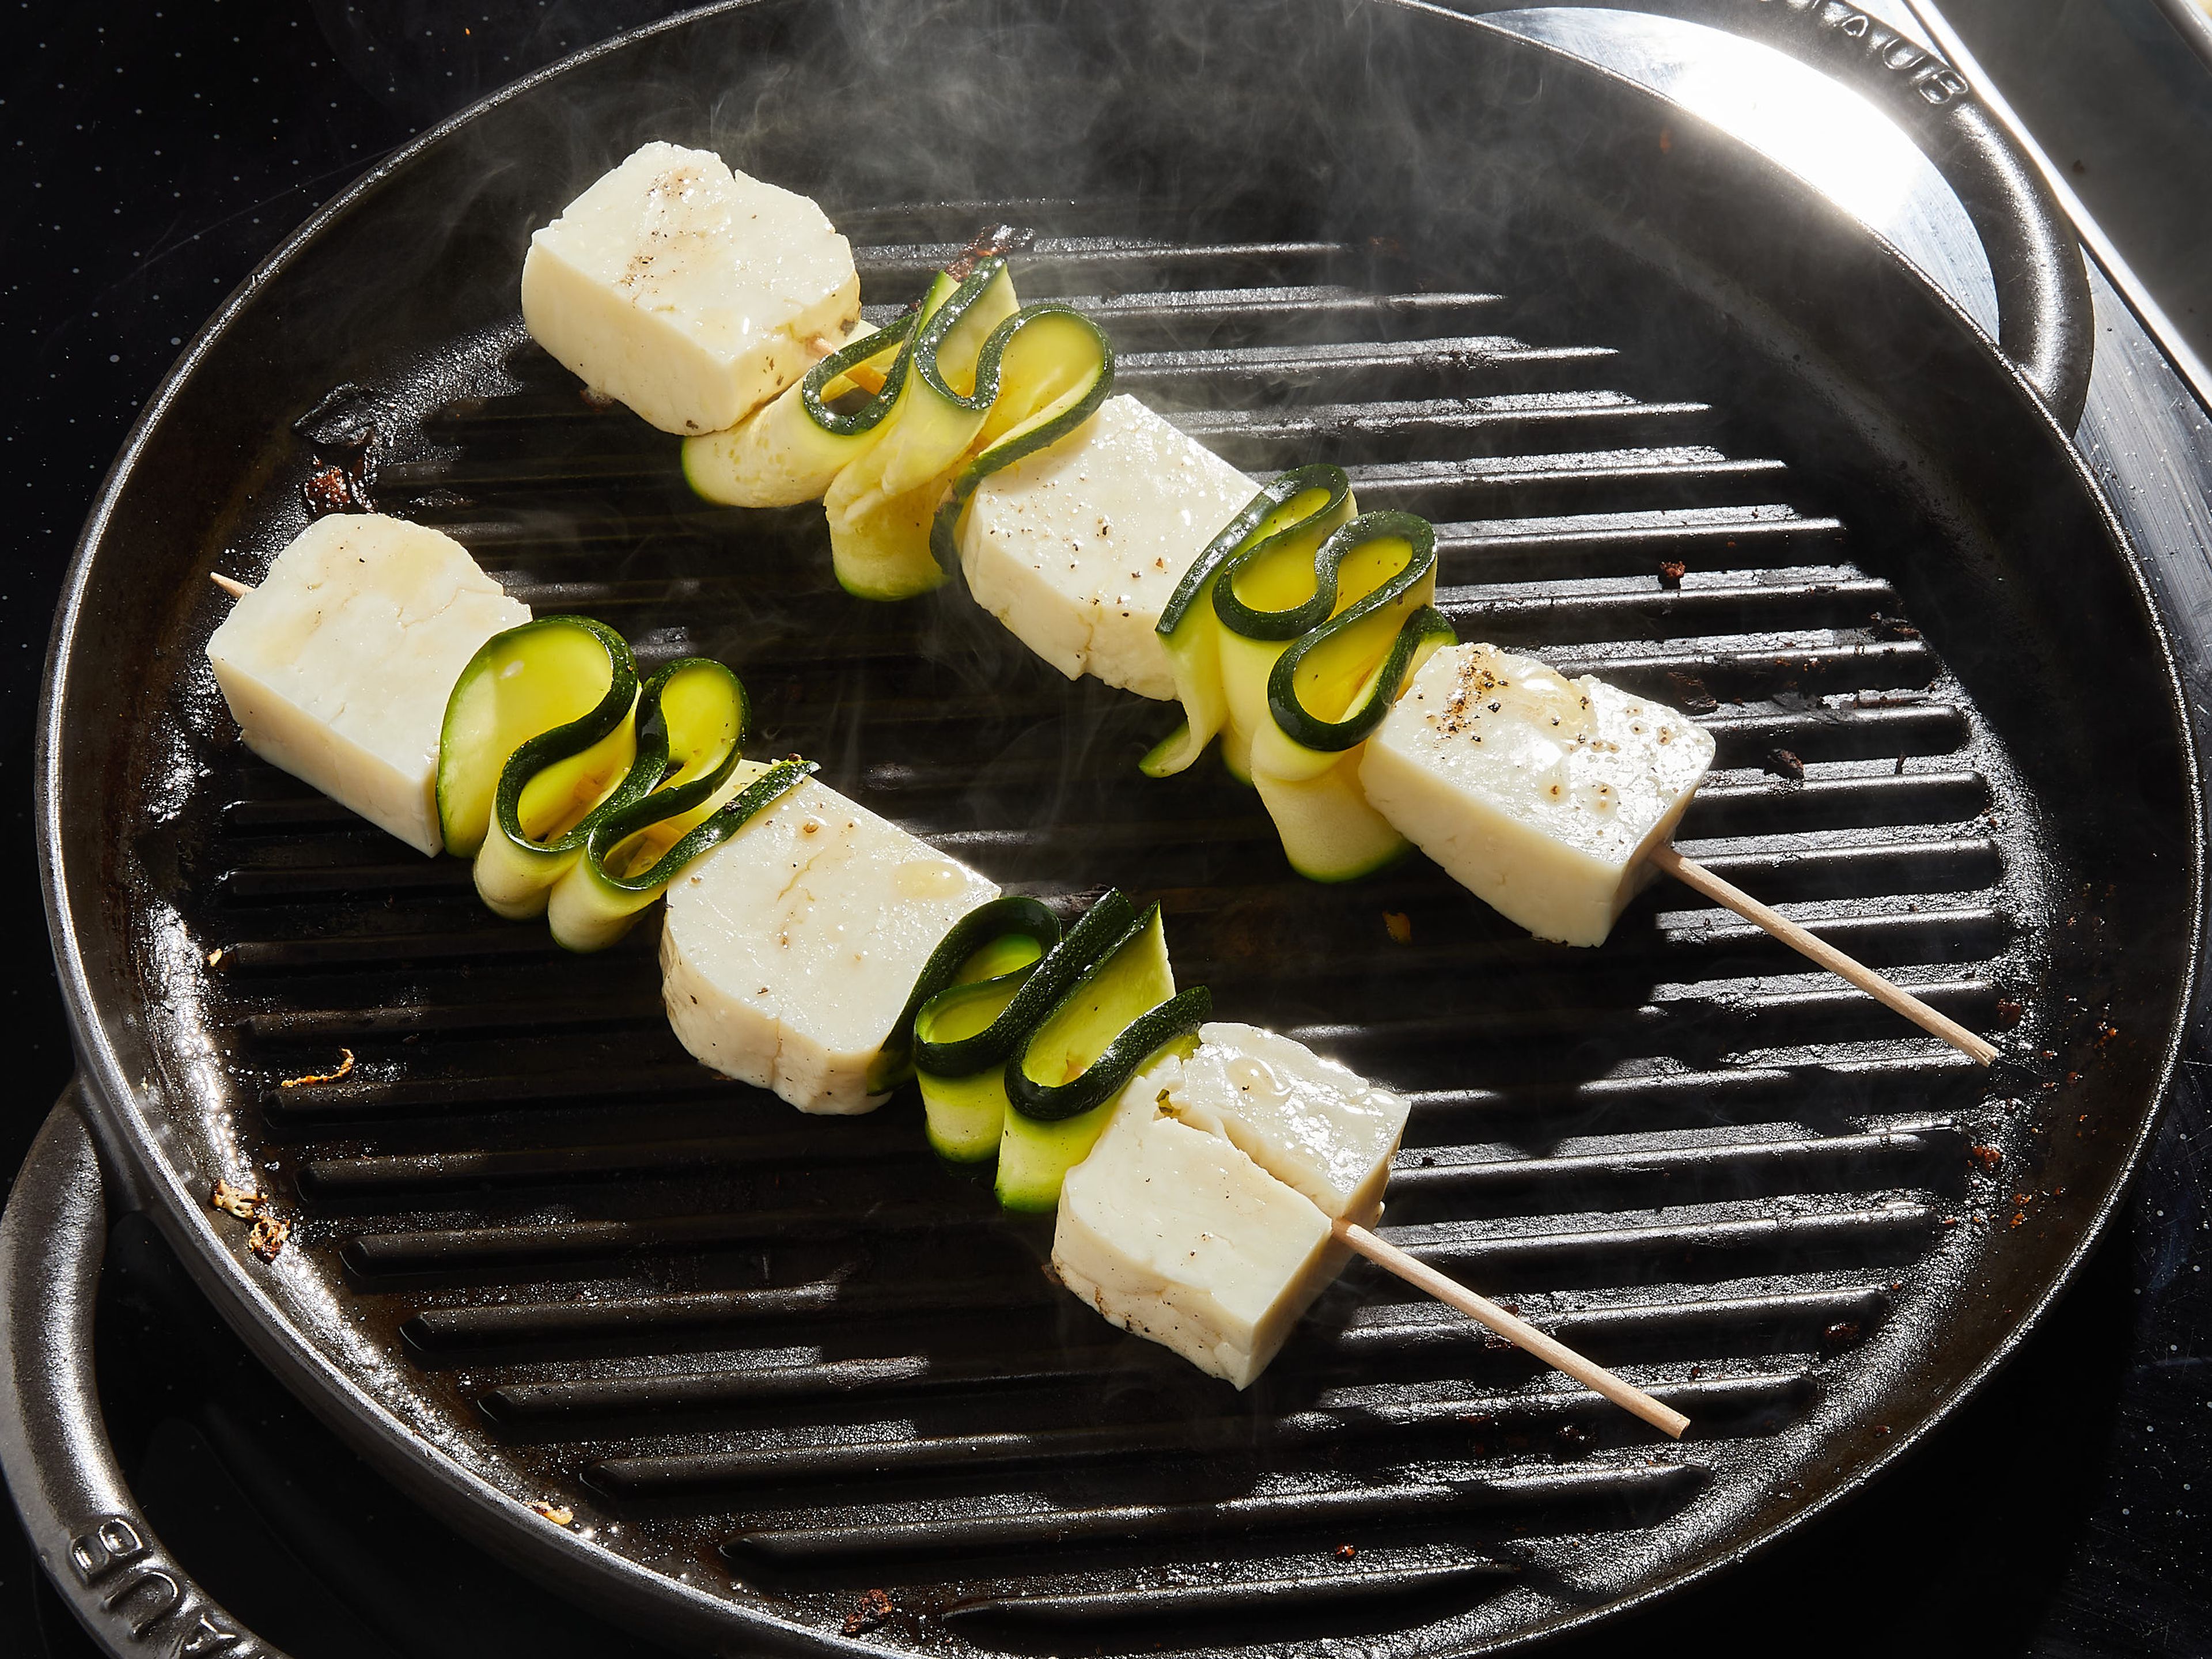 Sear evenly on all sides on a preheated grill or grill pan, about 10-17 min. or until the skewers are well browned. Transfer to a large plate and immediately drizzle with a little more olive oil and lemon juice. Sprinkle with chopped mint and the toasted sesame seeds. Enjoy!